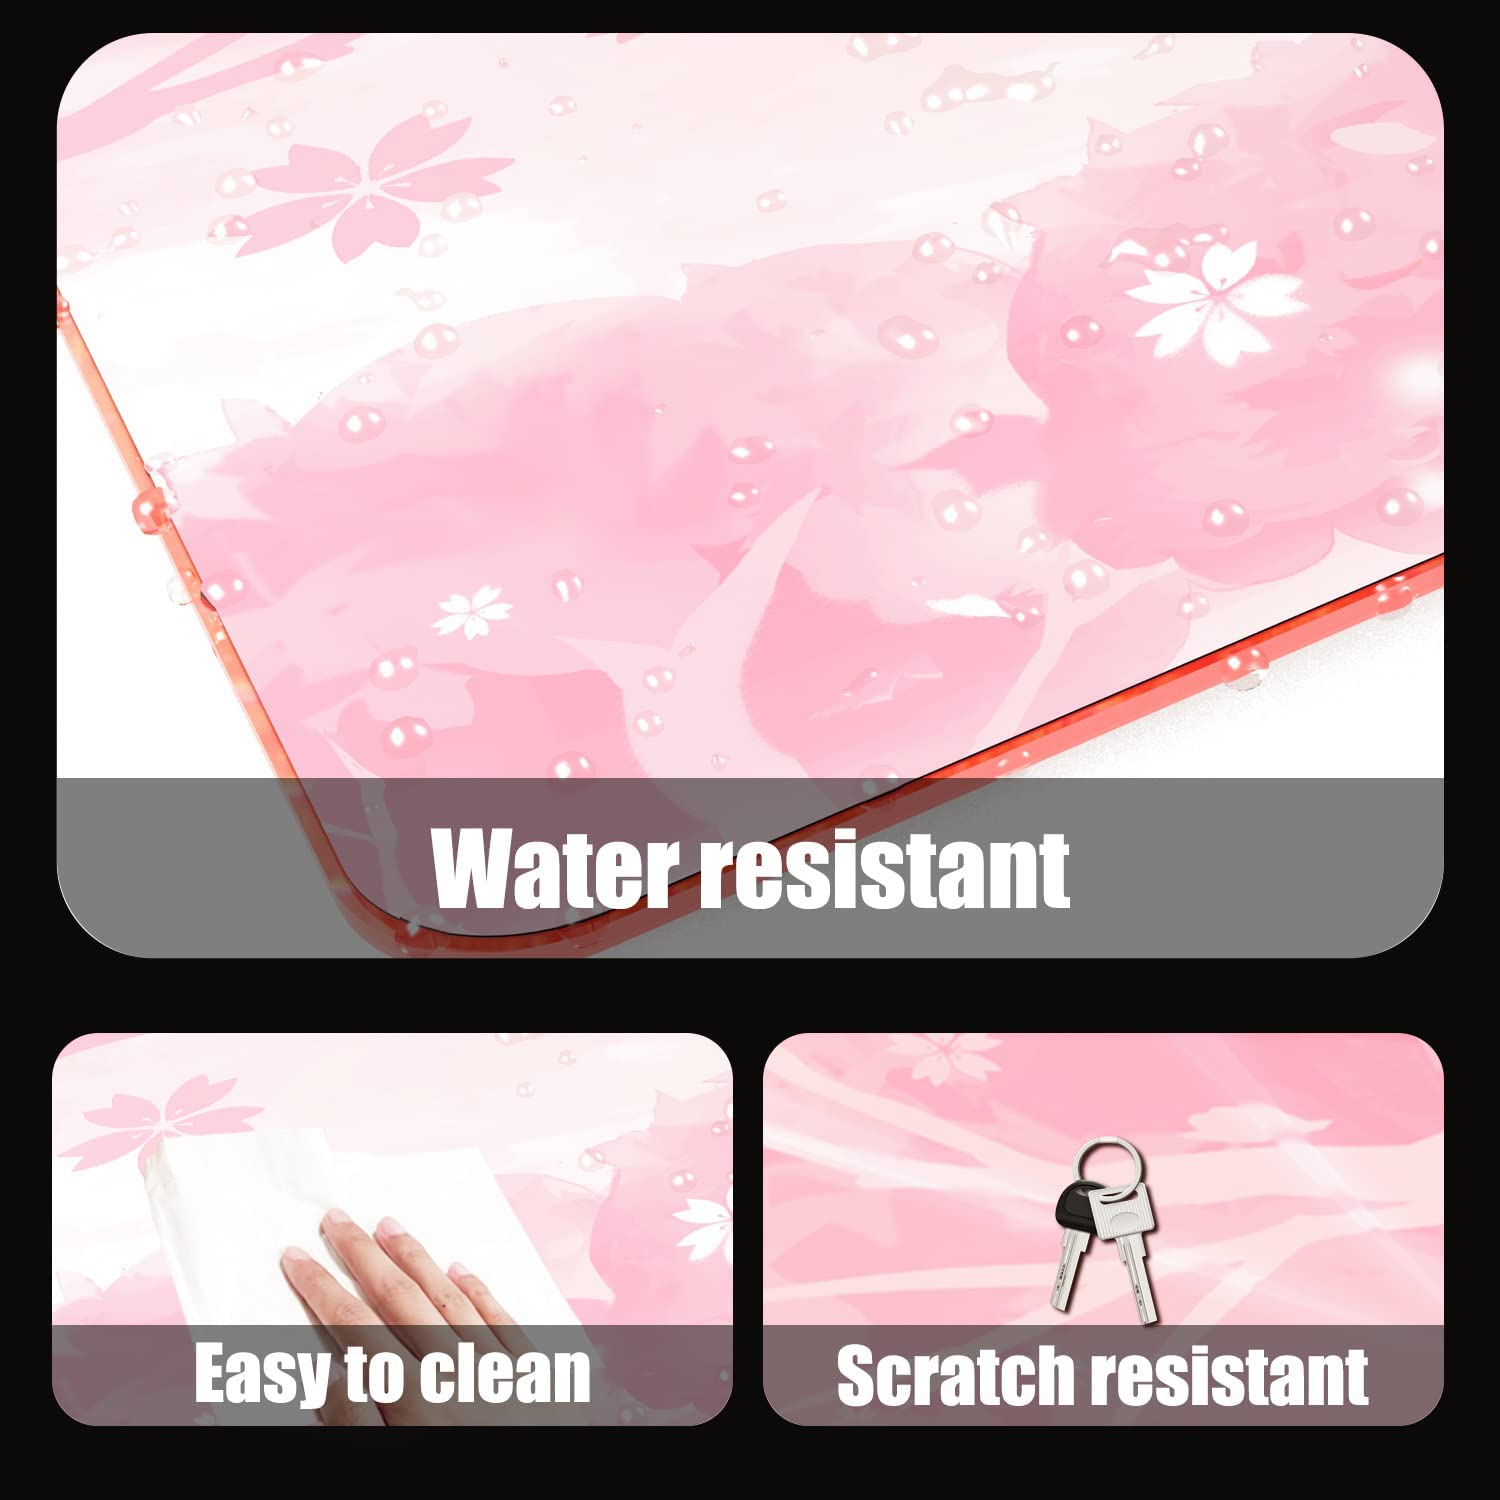 RGB Gaming Mouse Pad, LED Soft Extra Extended Large Office Mouse Pad, Anti-Slip Rubber Base, Computer Keyboard Mouse Mat (31.5 x 12 Inch) Sakura Cherry Blossoms Pink